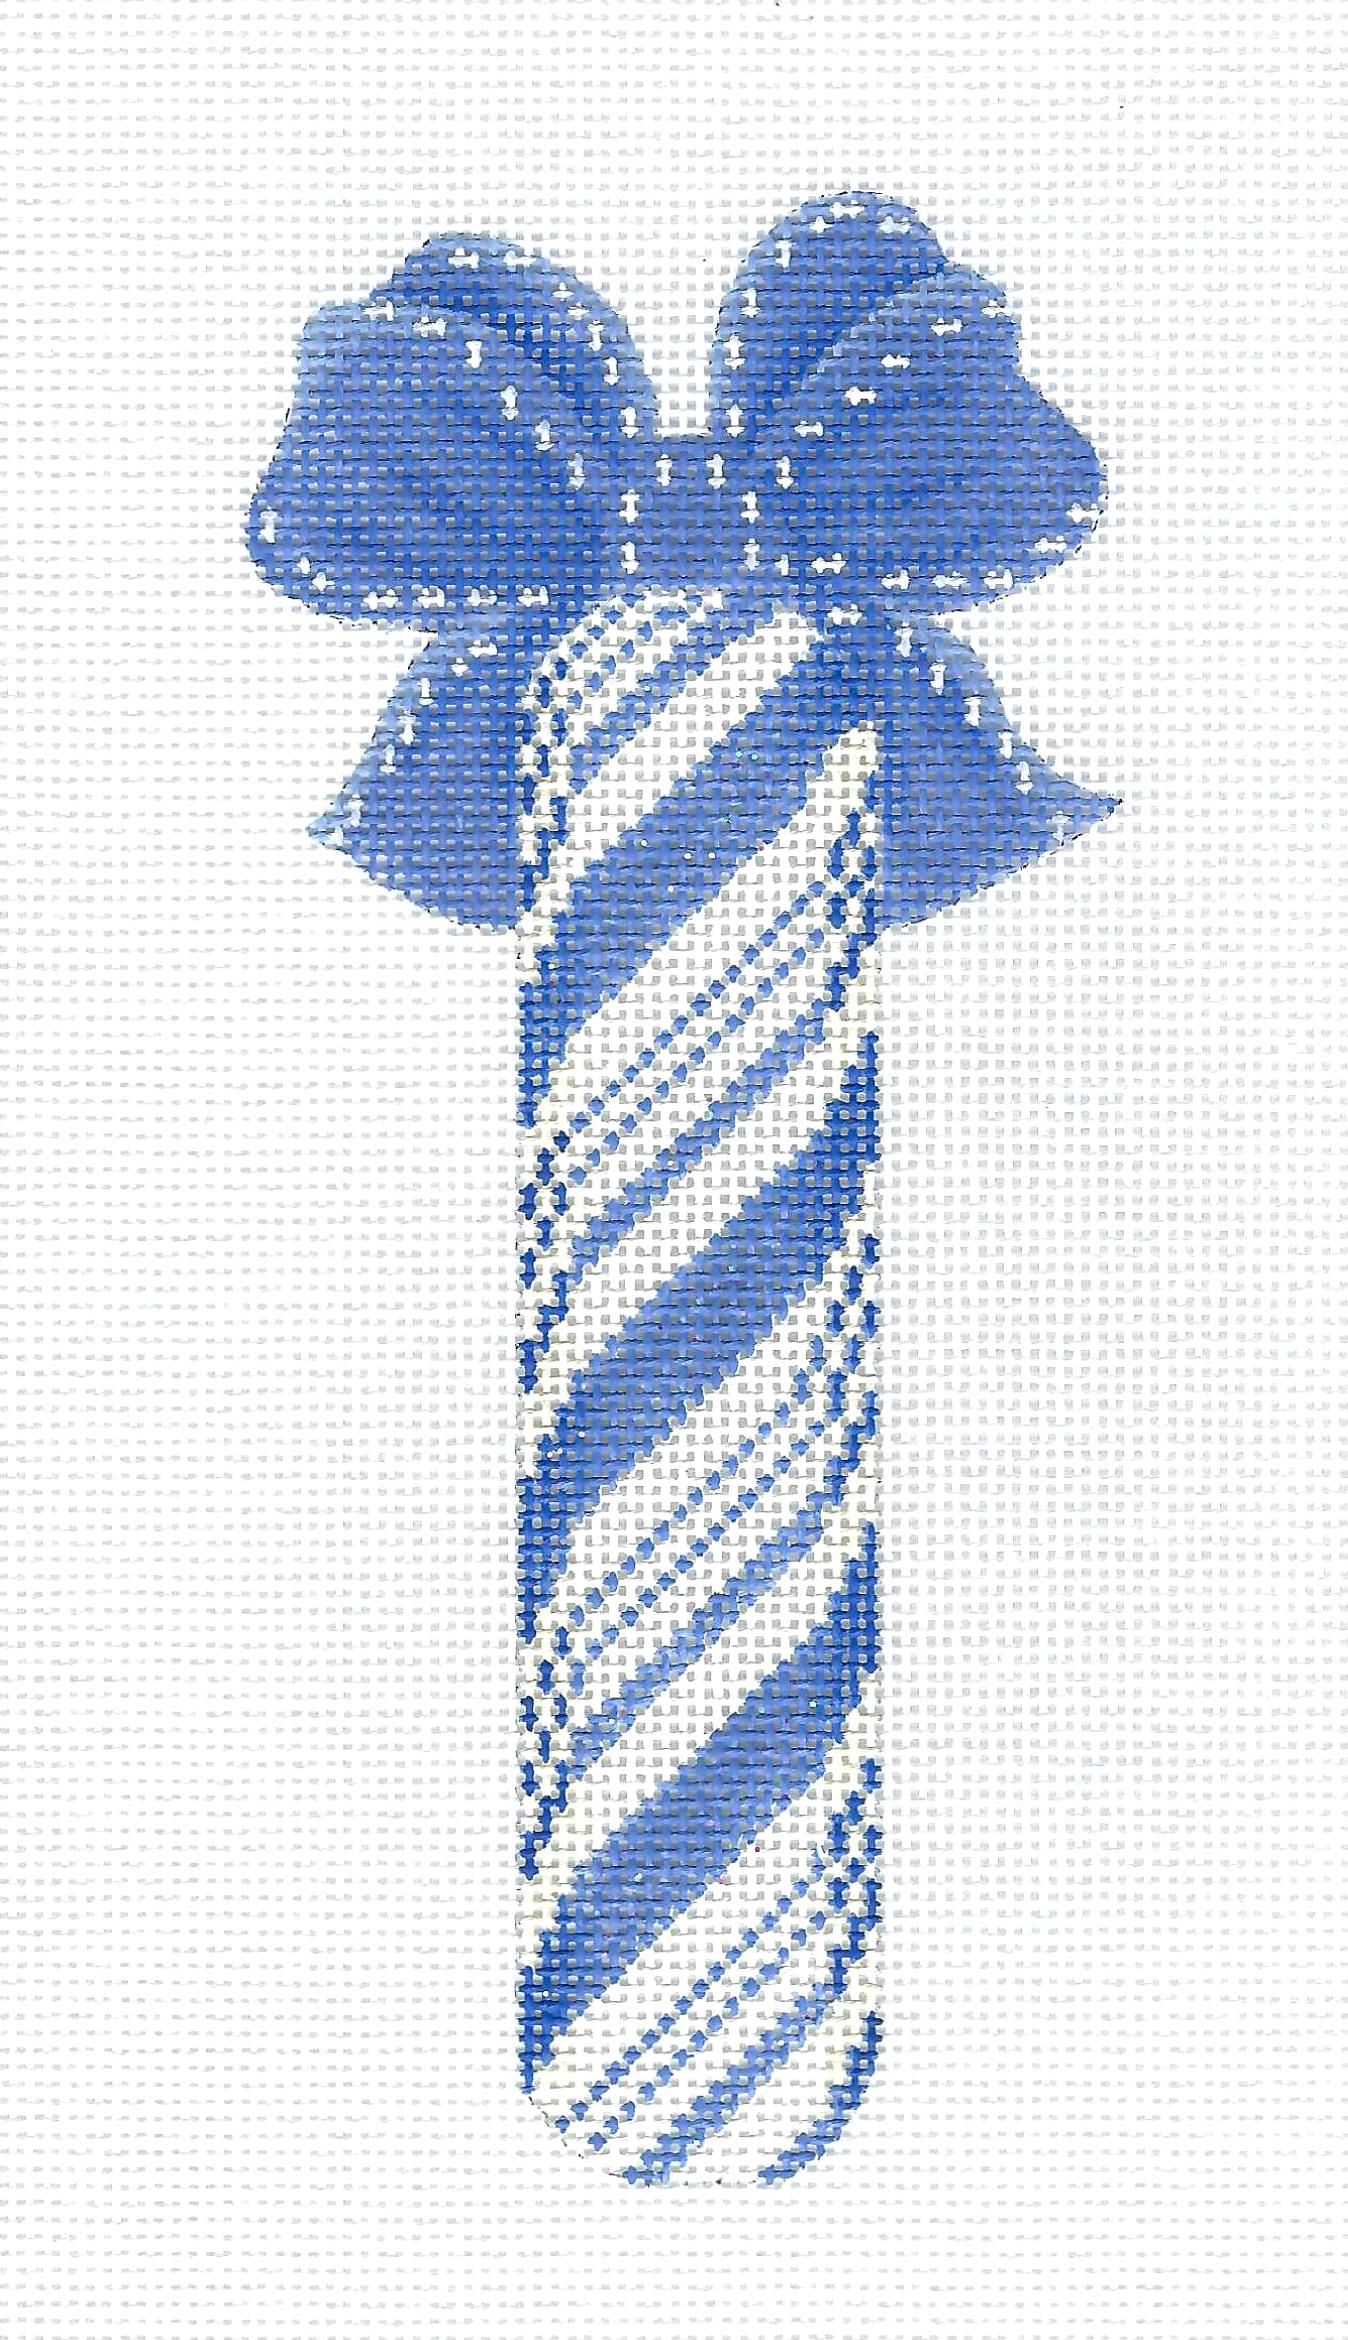 Candy Stick ~ Blue & White Candy Stick Periwinkle Handpainted 18 mesh Needlepoint Canvas by Kelly Clark